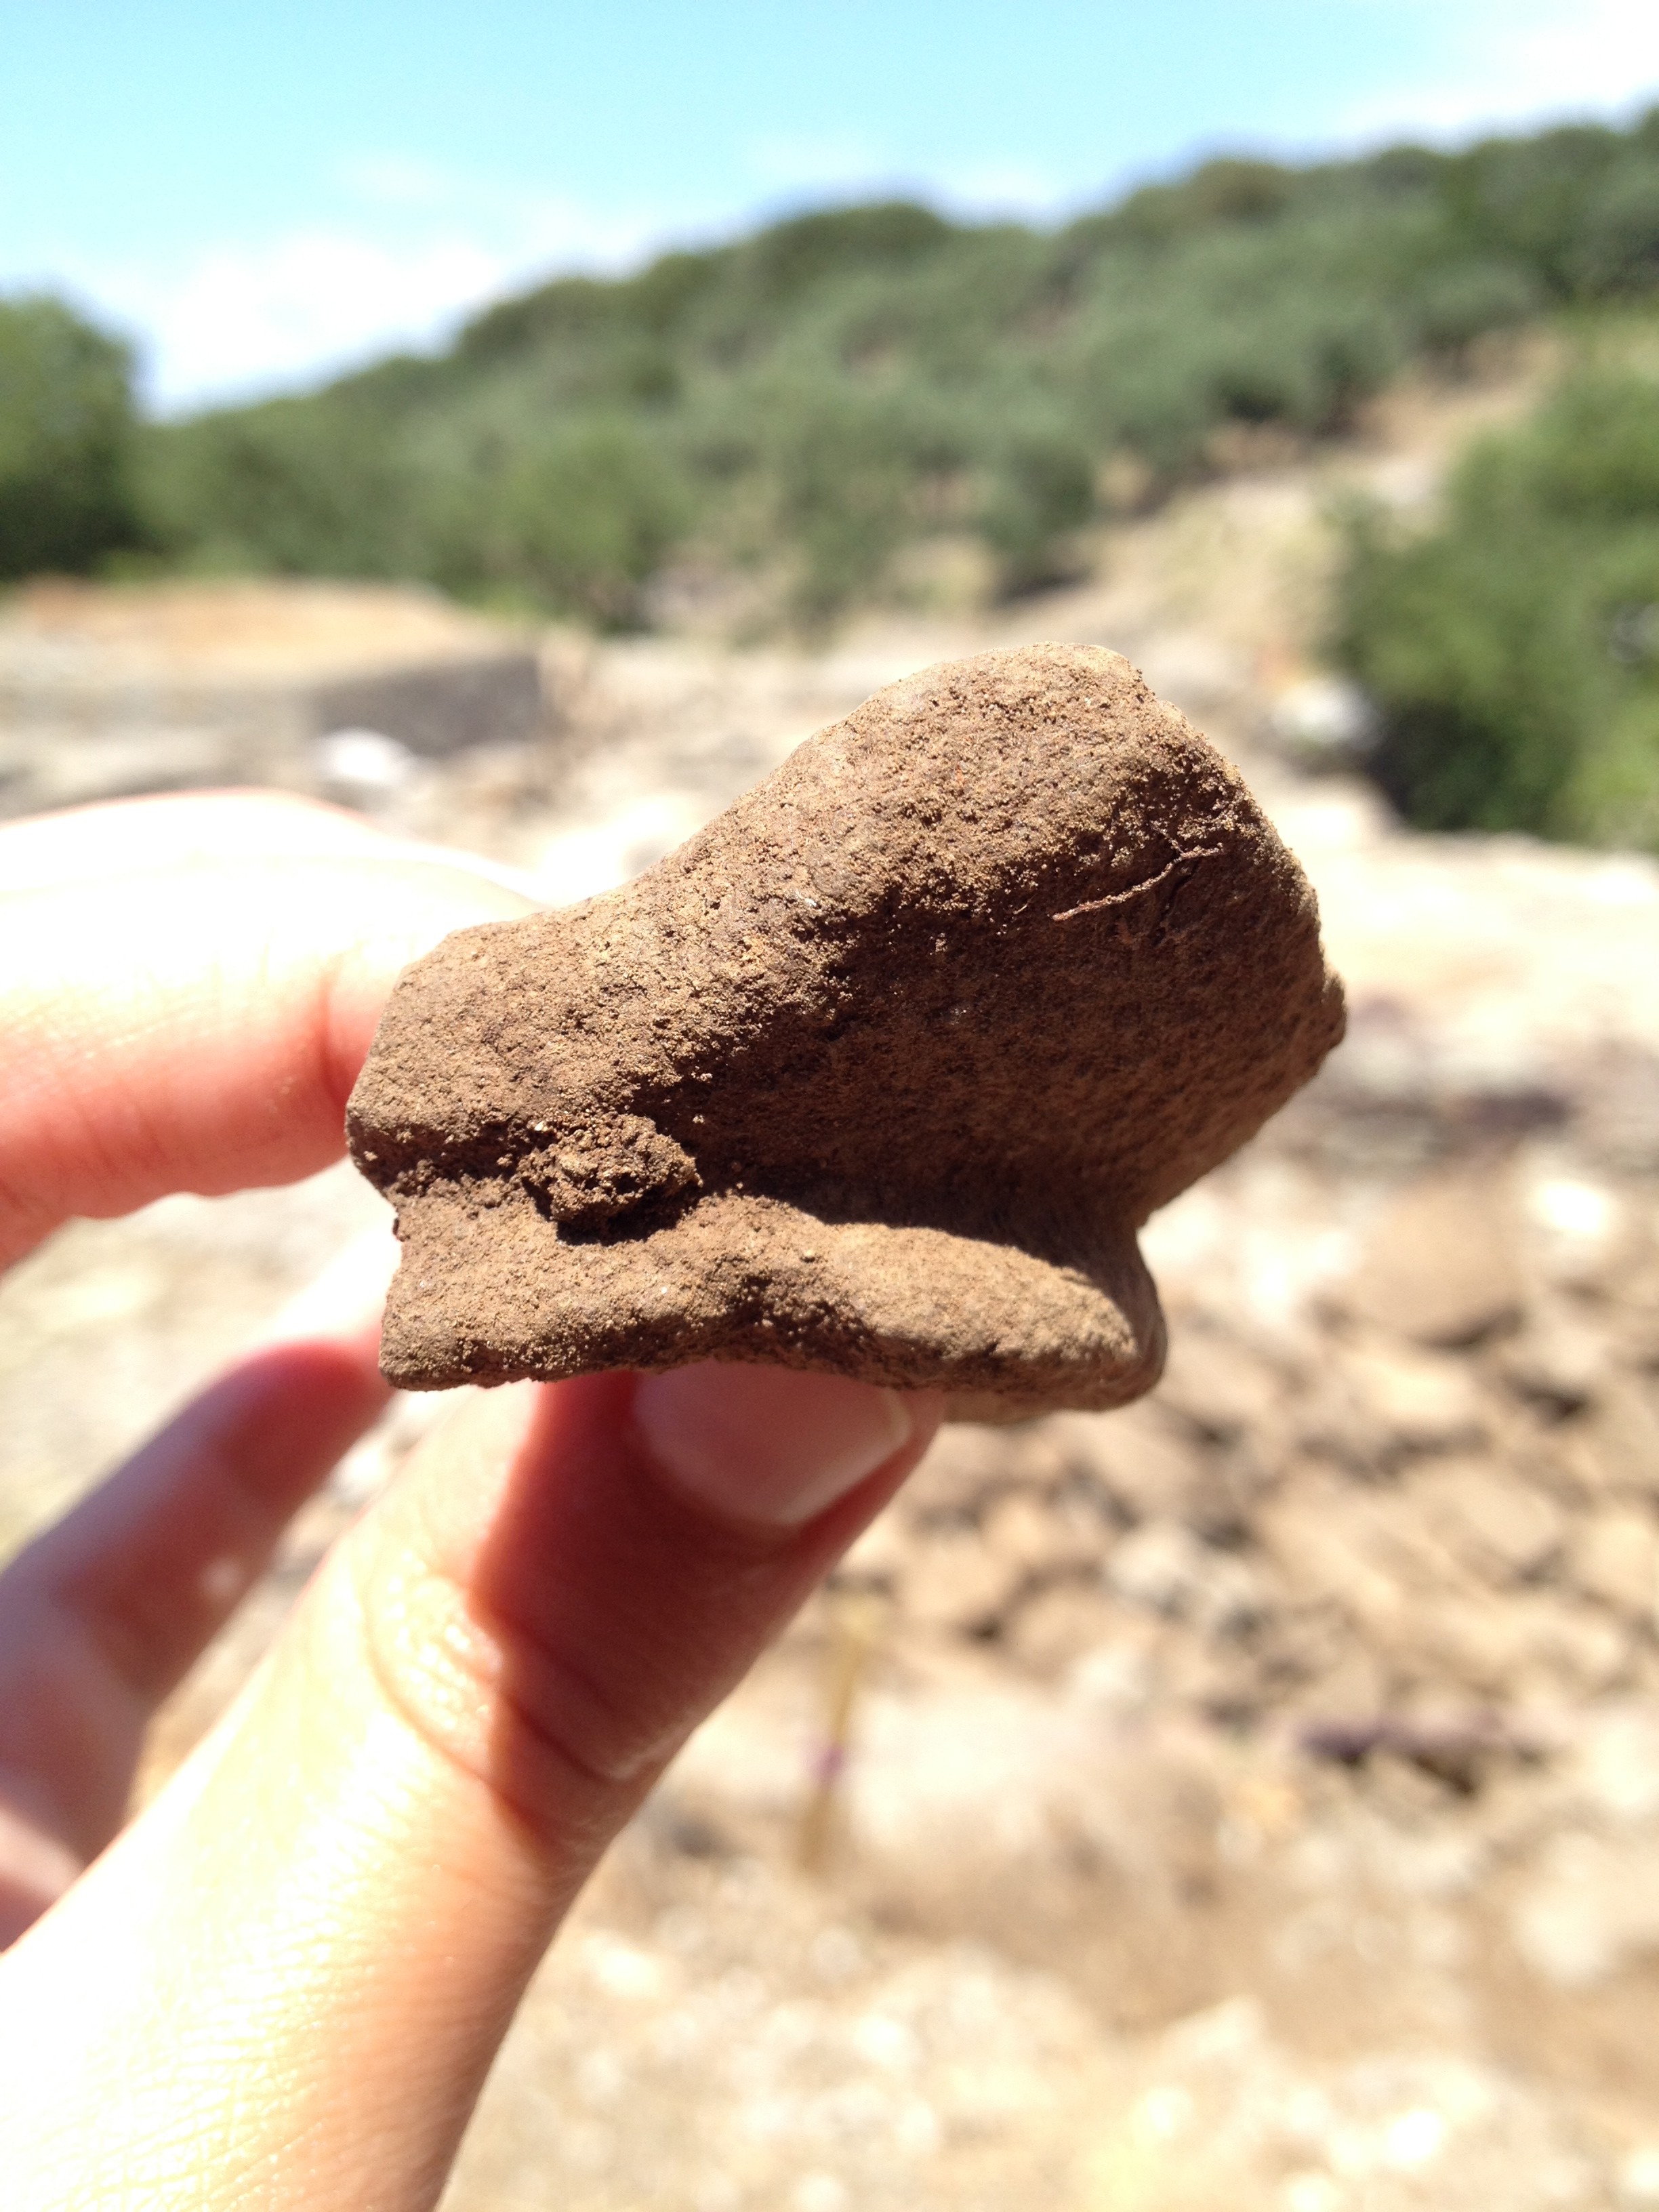 A broken coarse ware ring foot found during excavation of the Theatral Circle's retaining wall.